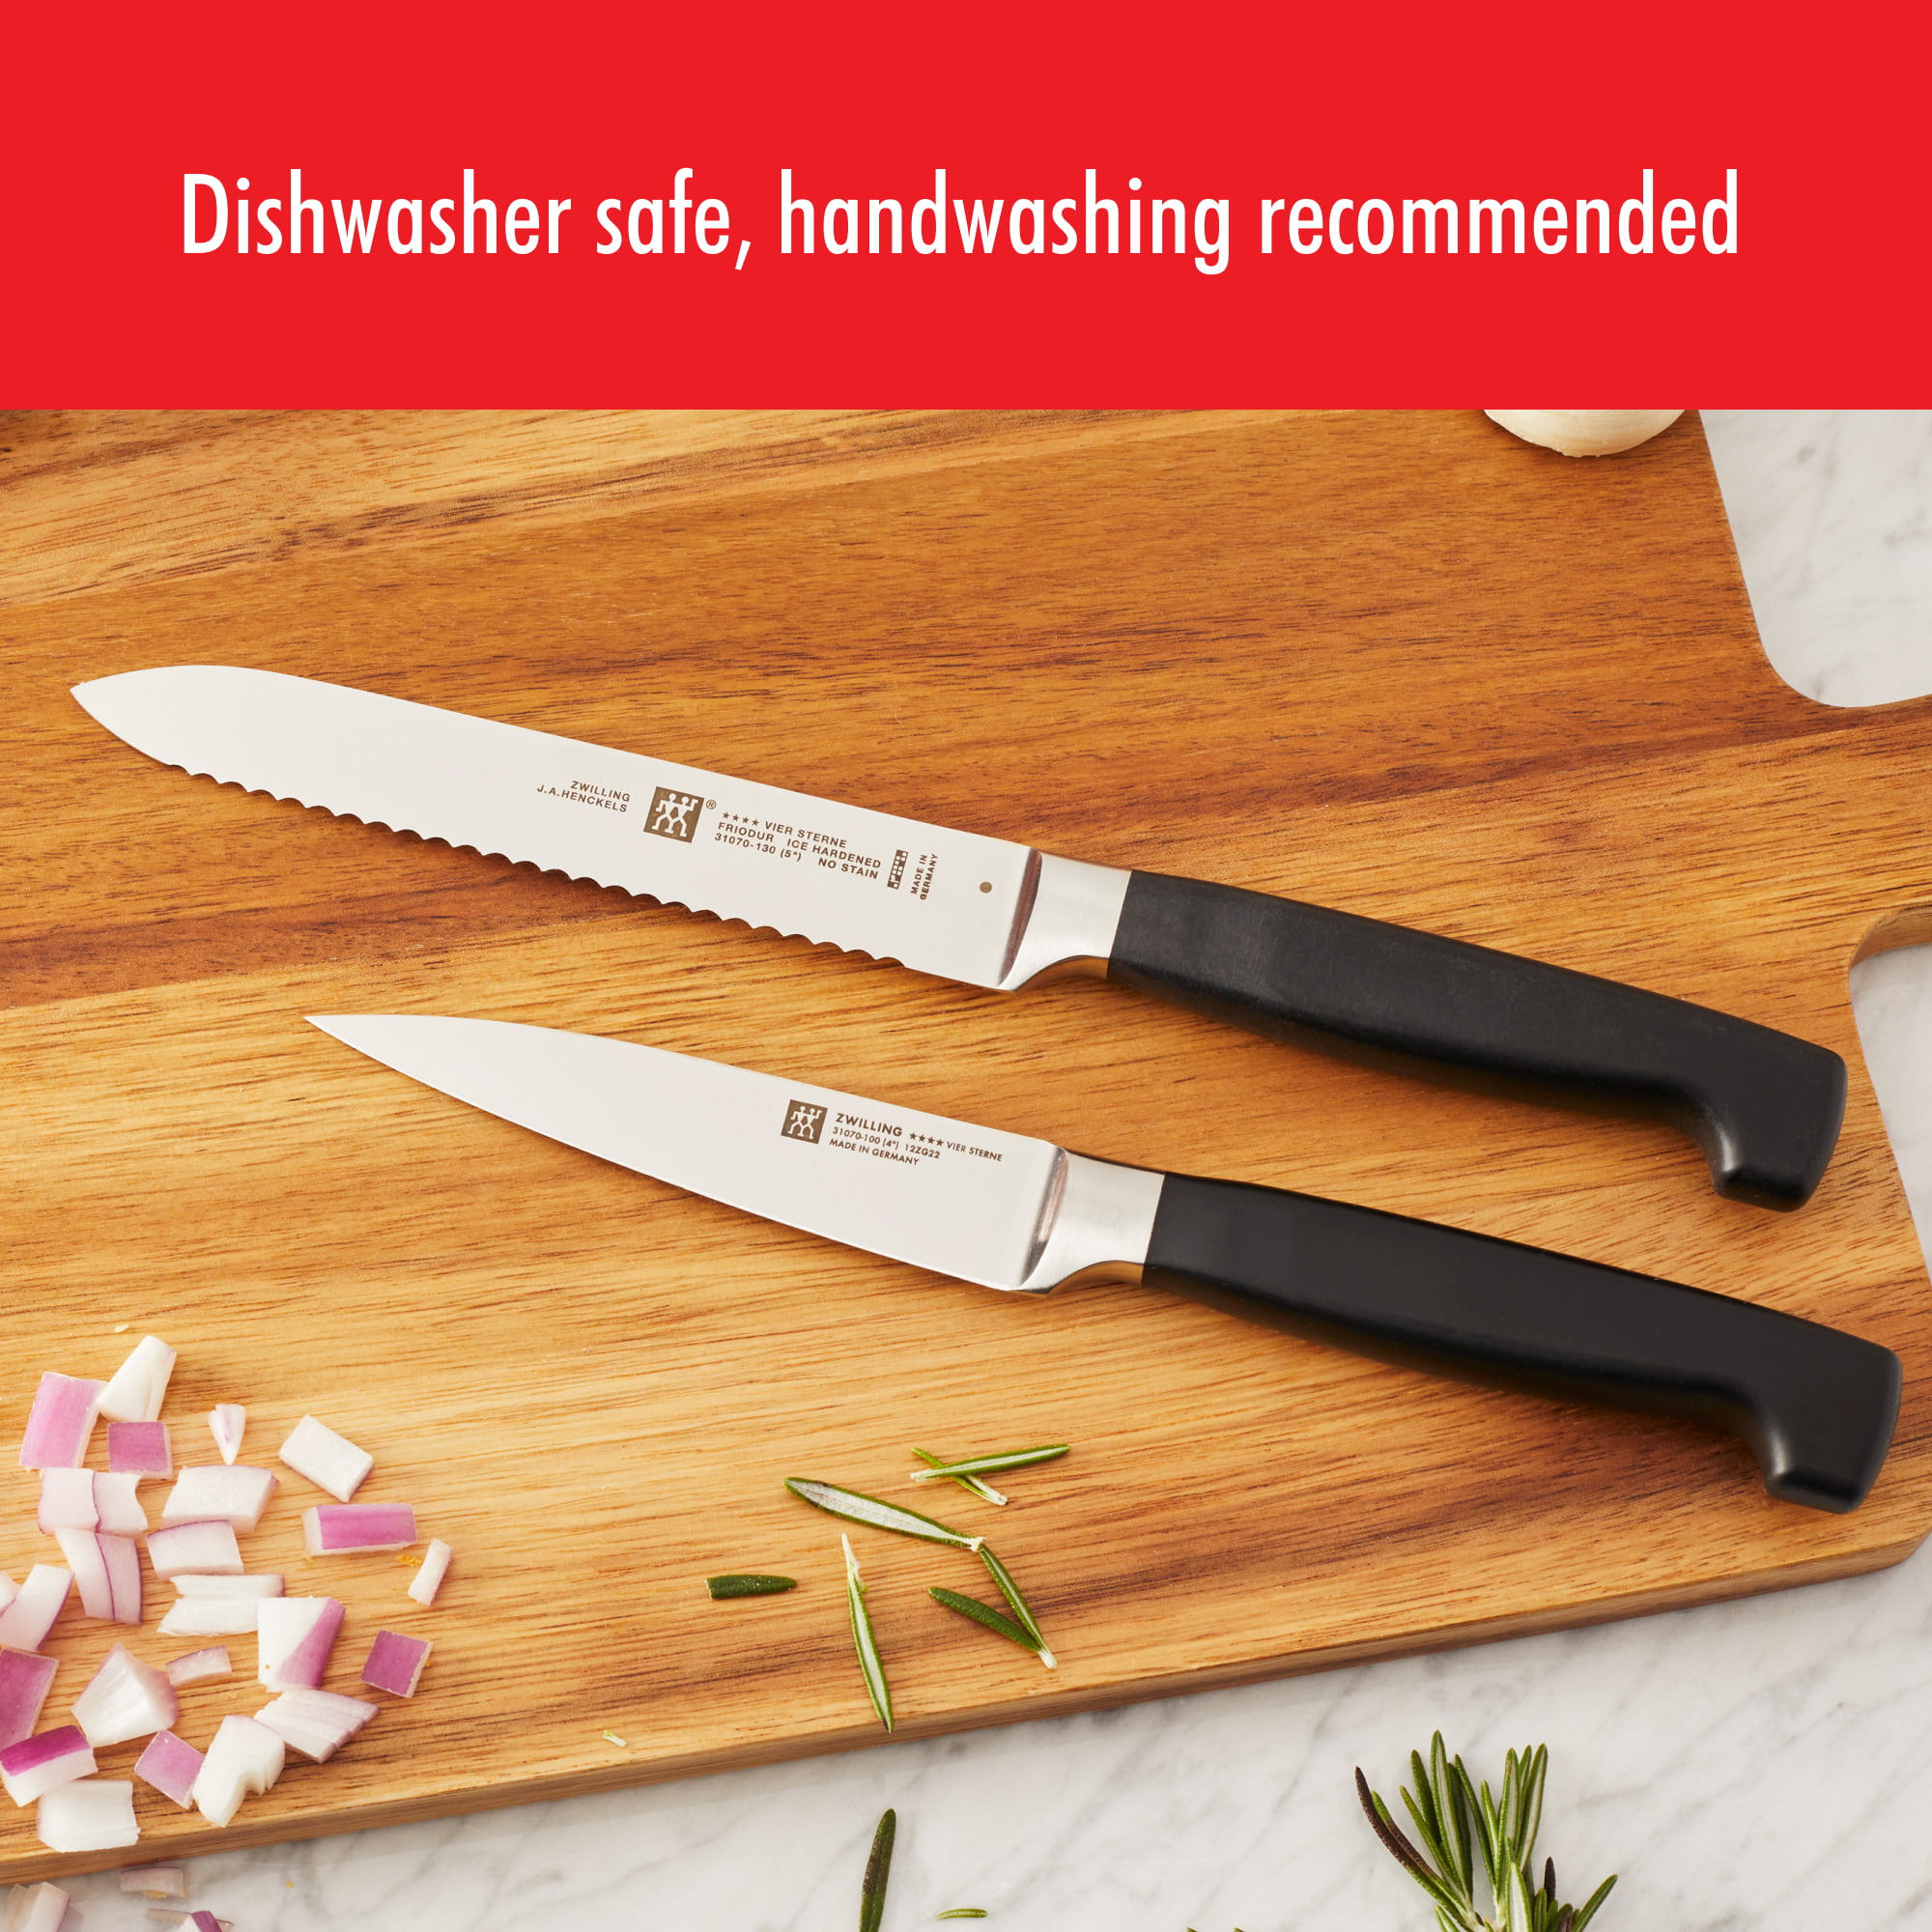 Zwilling ZWILLING J.A. Henckels Four Star 20-pc Knife Block Set - High  Carbon Stainless Steel Blades, Dishwasher Safe, Bamboo Block, Made in  Germany in the Cutlery department at